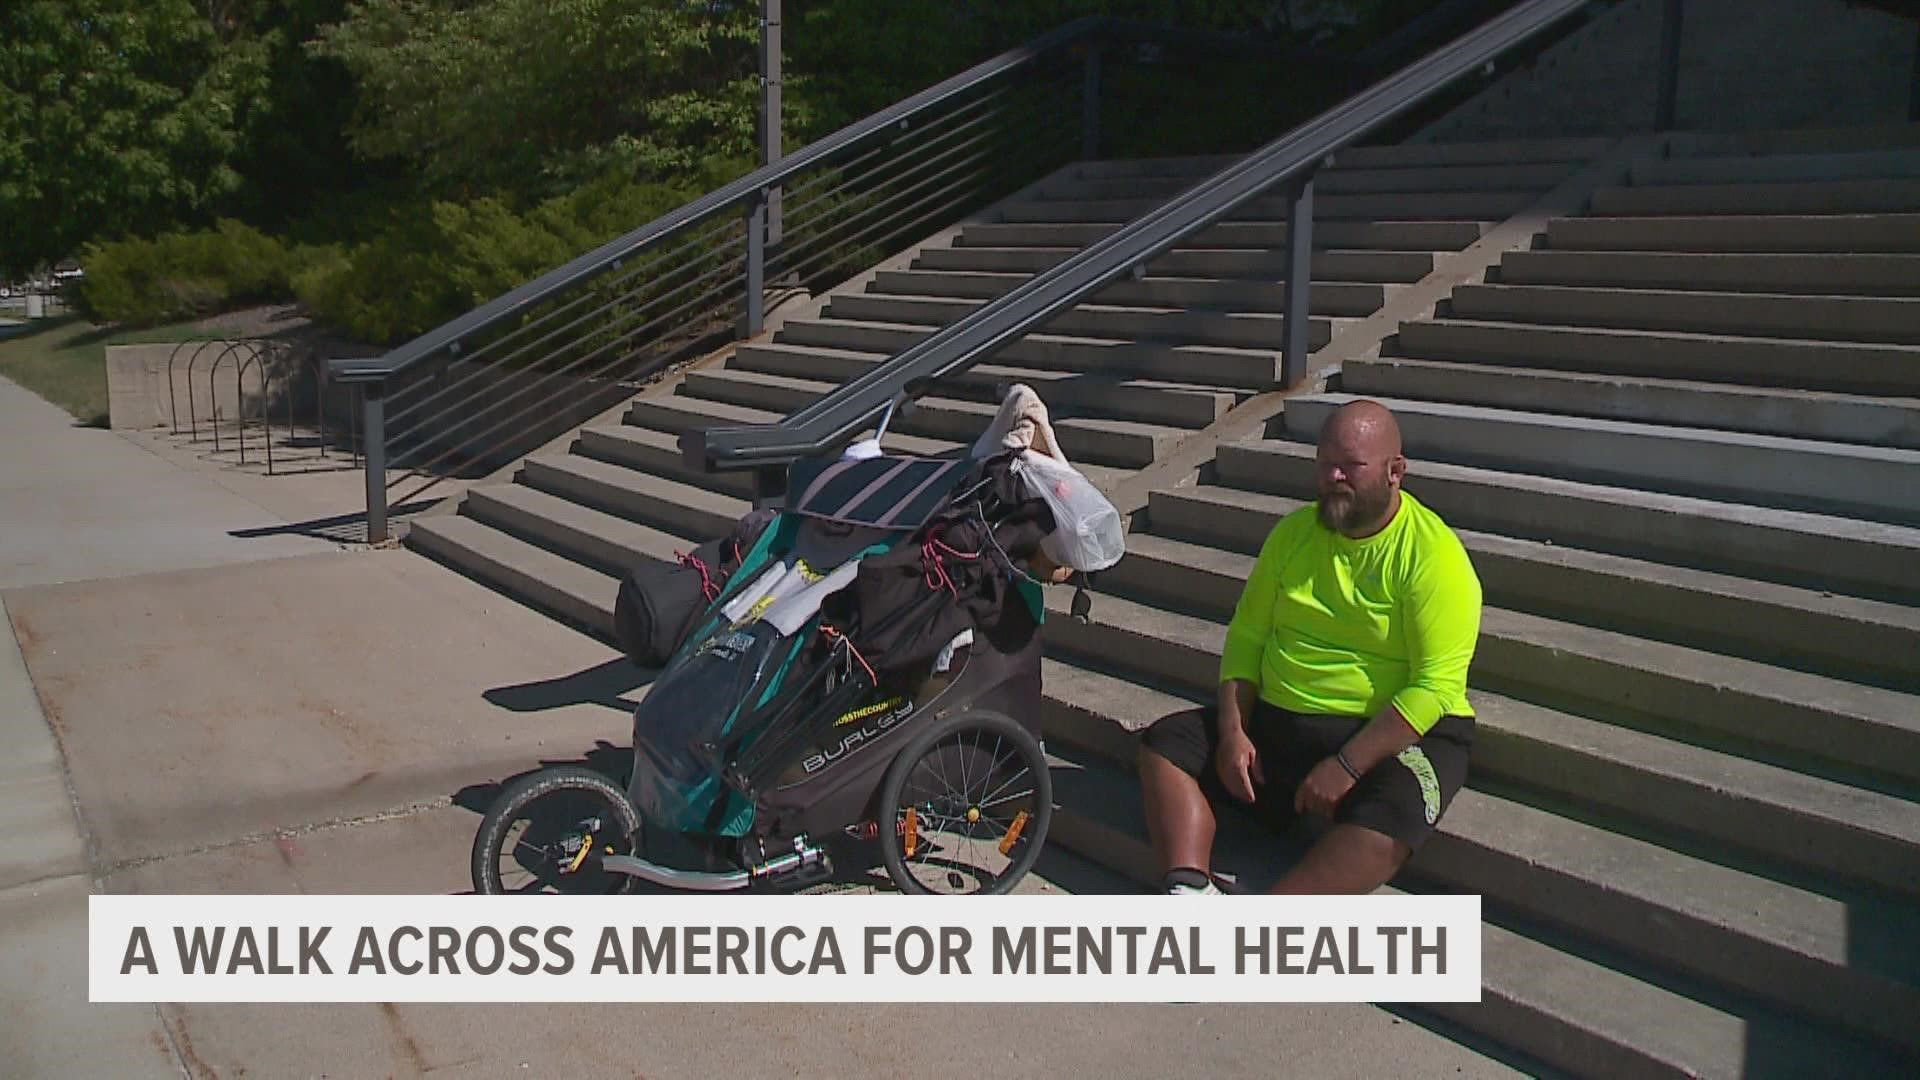 Joe Hall, who is walking from Delaware to California, stopped in Ames to share his story and advocate for mental health.